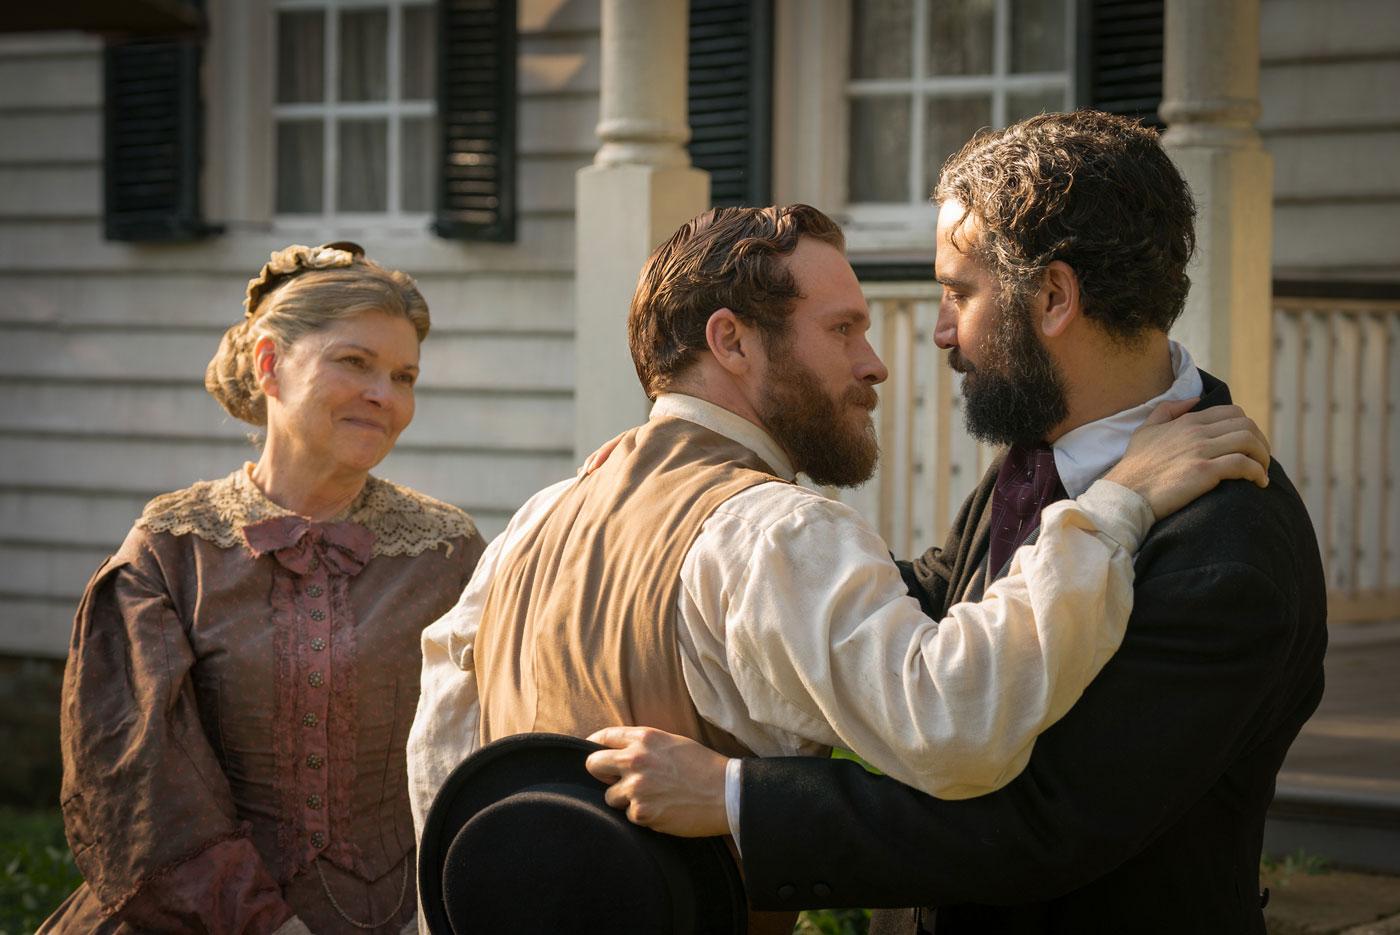 Jed returns to his family's plantation but is soon disgusted by his mother's and brother's support of slavery. (Courtesy of PBS/Erik Heinila)